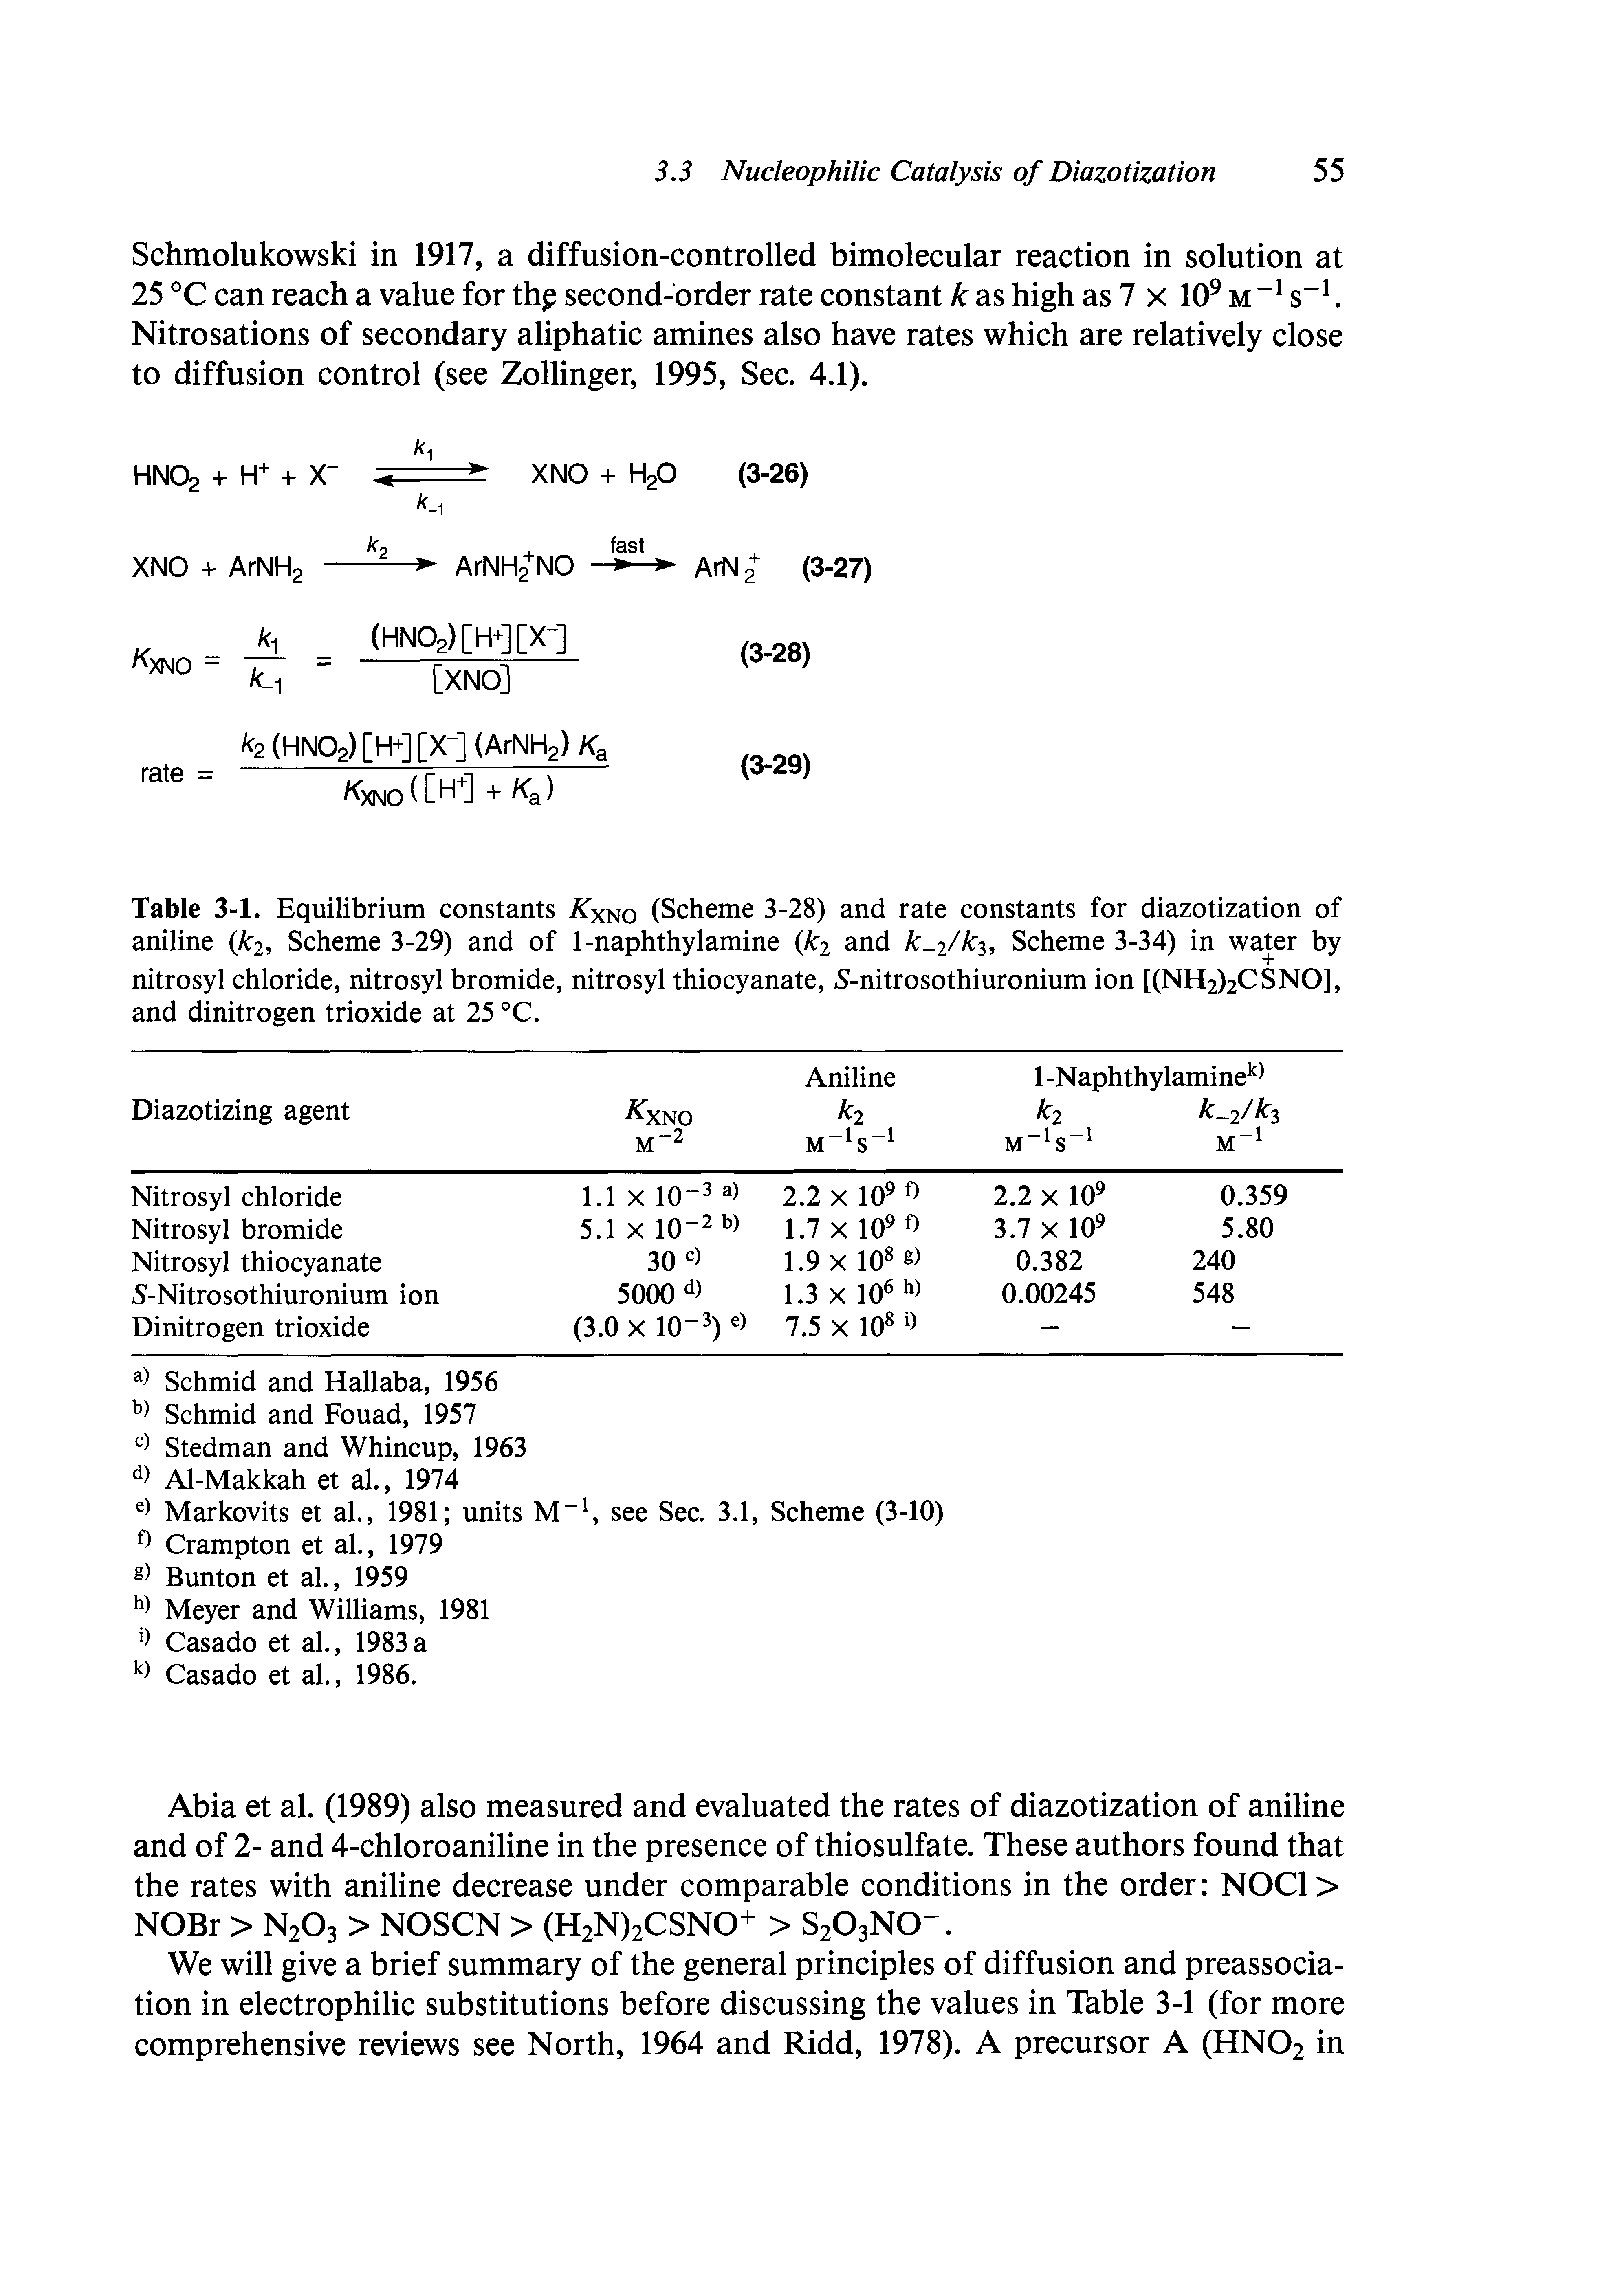 Table 3-1. Equilibrium constants Kxno (Scheme 3-28) and rate constants for diazotization of aniline (Ar2, Scheme 3-29) and of 1-naphthylamine (k2 and k-2/k Scheme 3-34) in water by nitrosyl chloride, nitrosyl bromide, nitrosyl thiocyanate, S-nitrosothiuronium ion [(NH2)2CSNO], and dinitrogen trioxide at 25 °C.